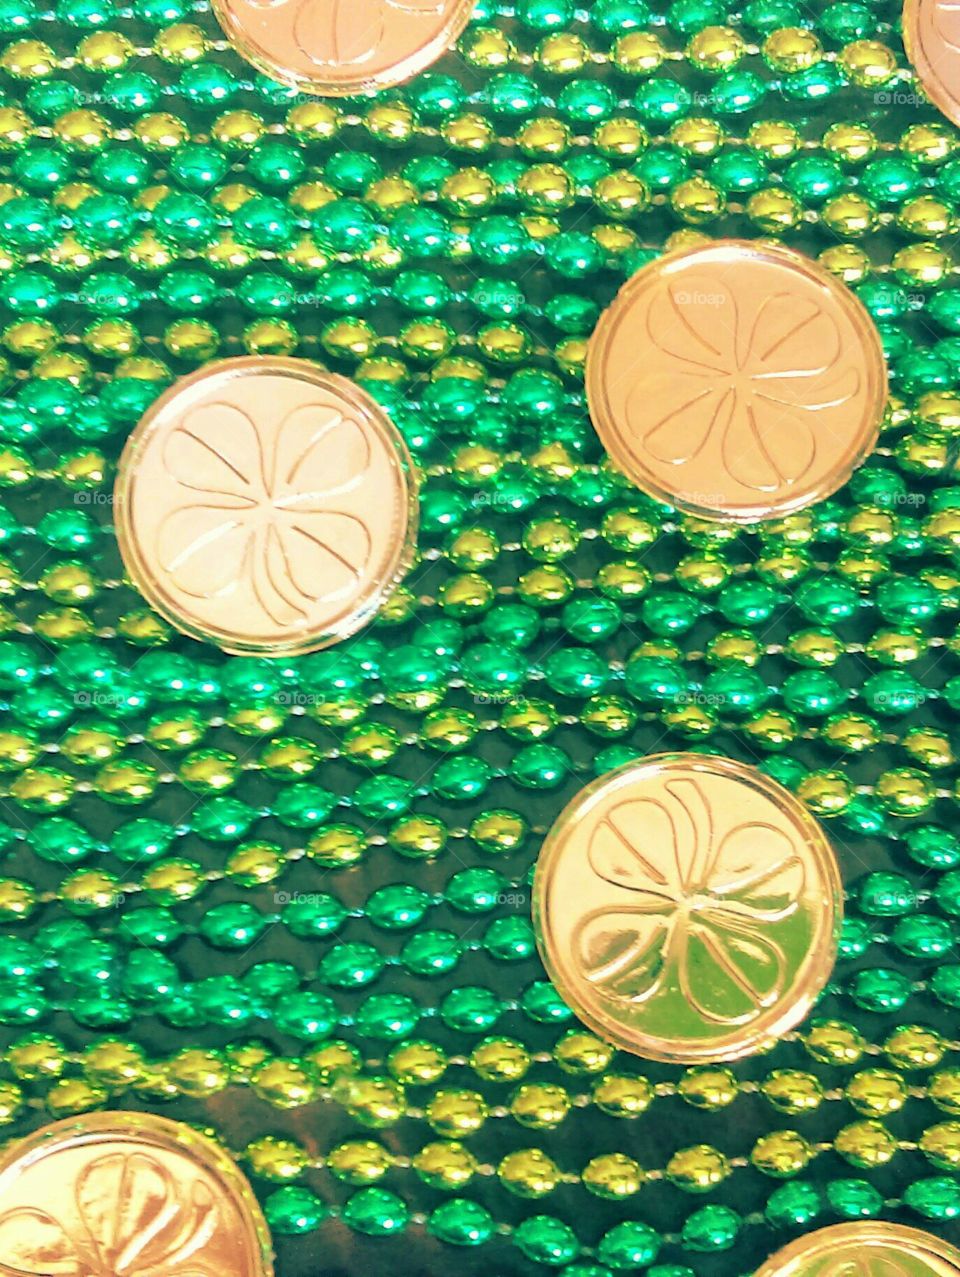 Gold leaf clover coins with green beads.